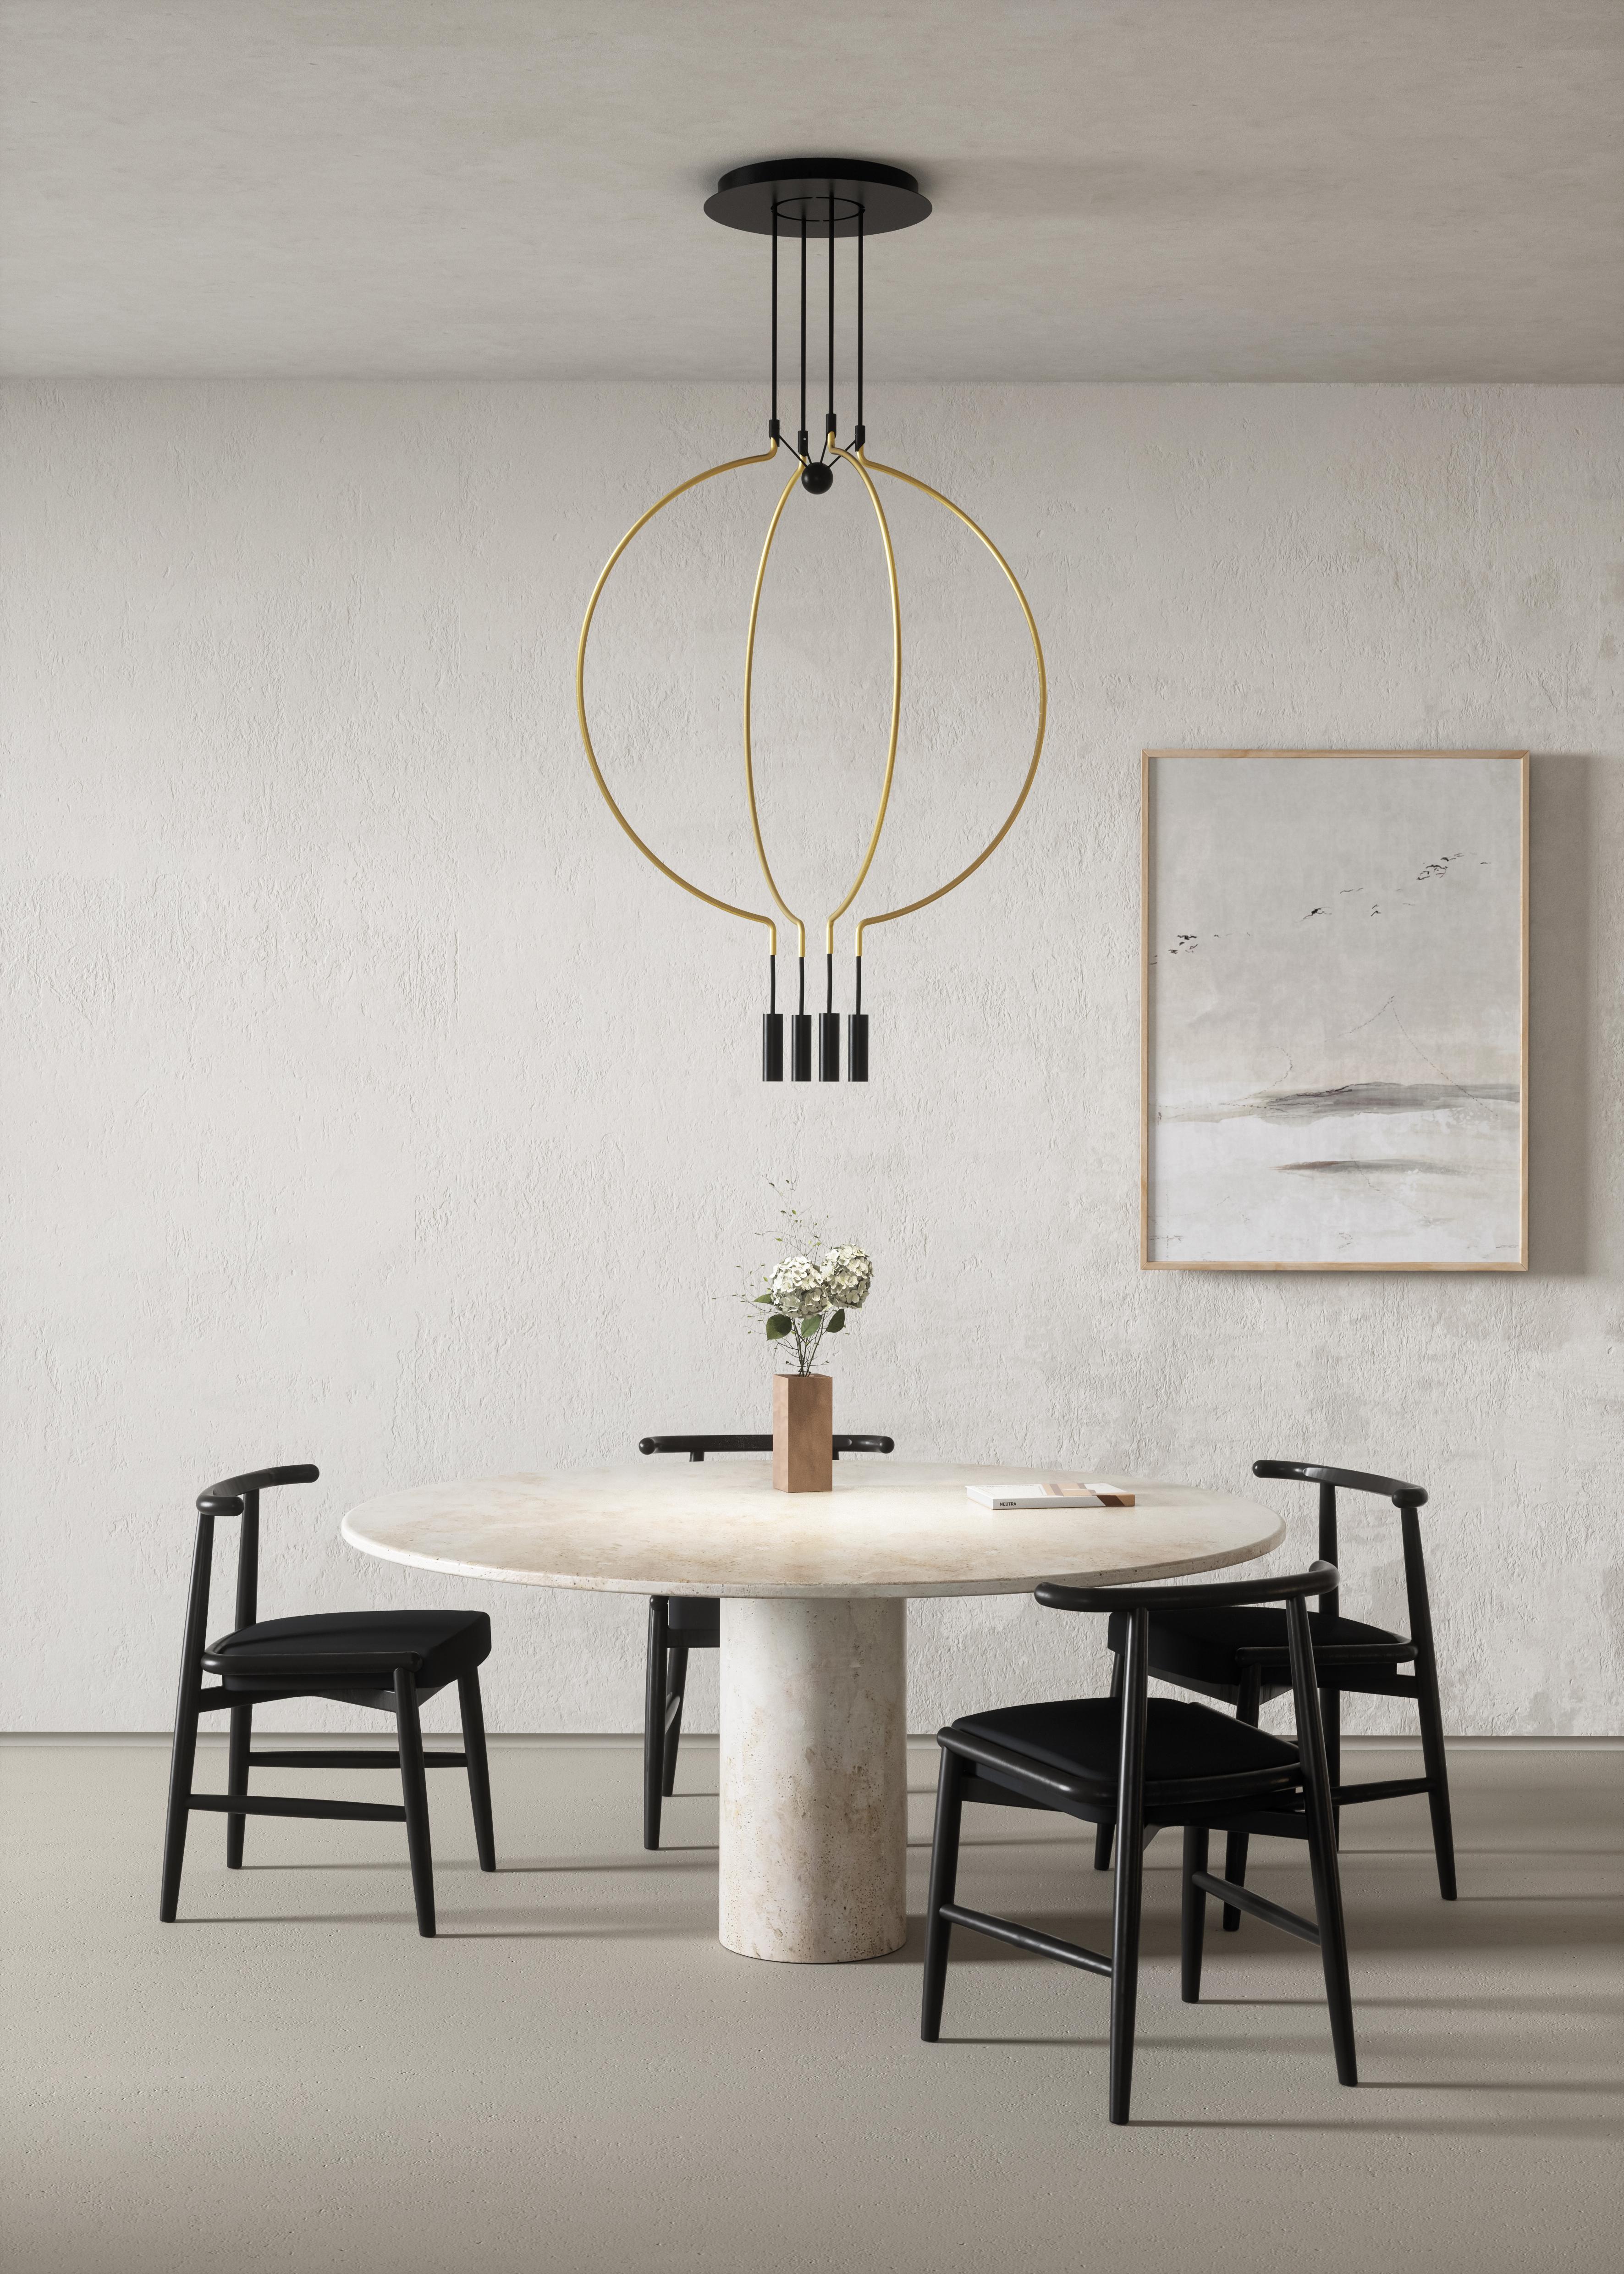 Axolight Liaison Model P8 Pendant Lamp in Black/Black by Sara Moroni

Modular lightness and elegance. Liaison tells about the perfect balance of three geometric archetypes: sphere, circle and cylinder compose a system that includes the single